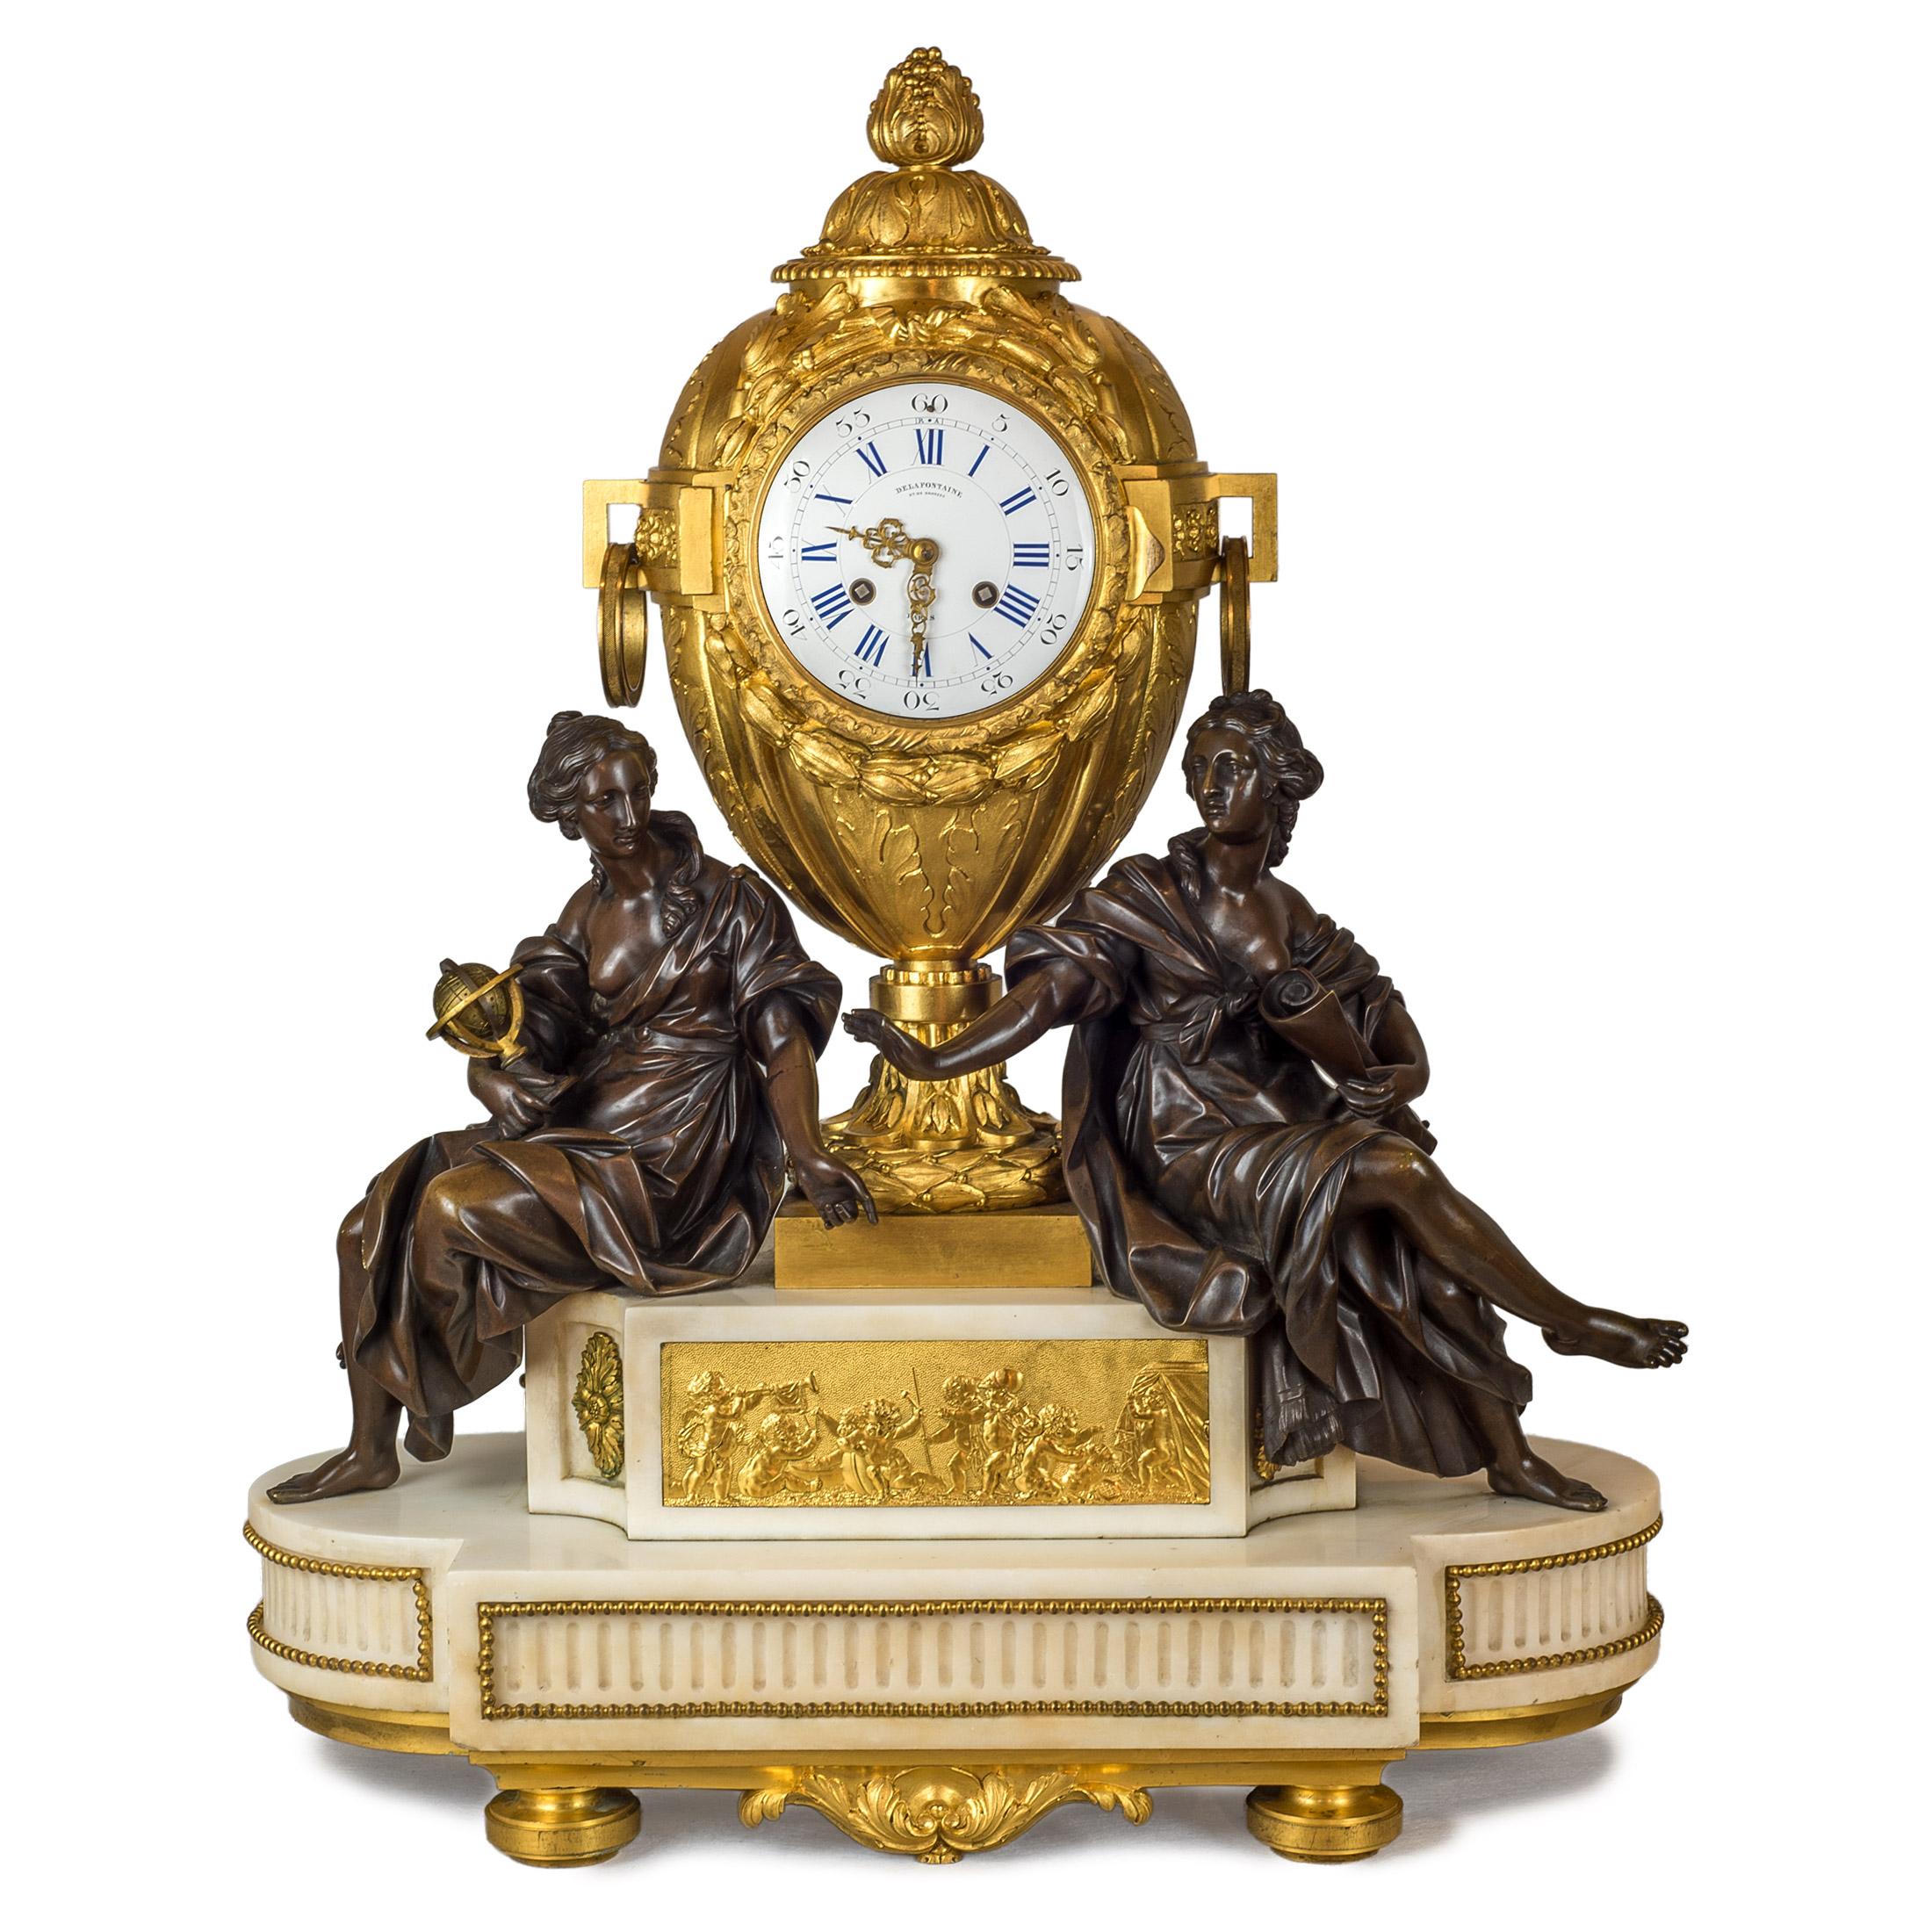 A fine quality French ormolu and patinated bronze and white marble clock set with cherubs holding the candelabras and large central clock with two female figures one holding a globe and the other a scroll. Clock face marked ‘De La Fontaine